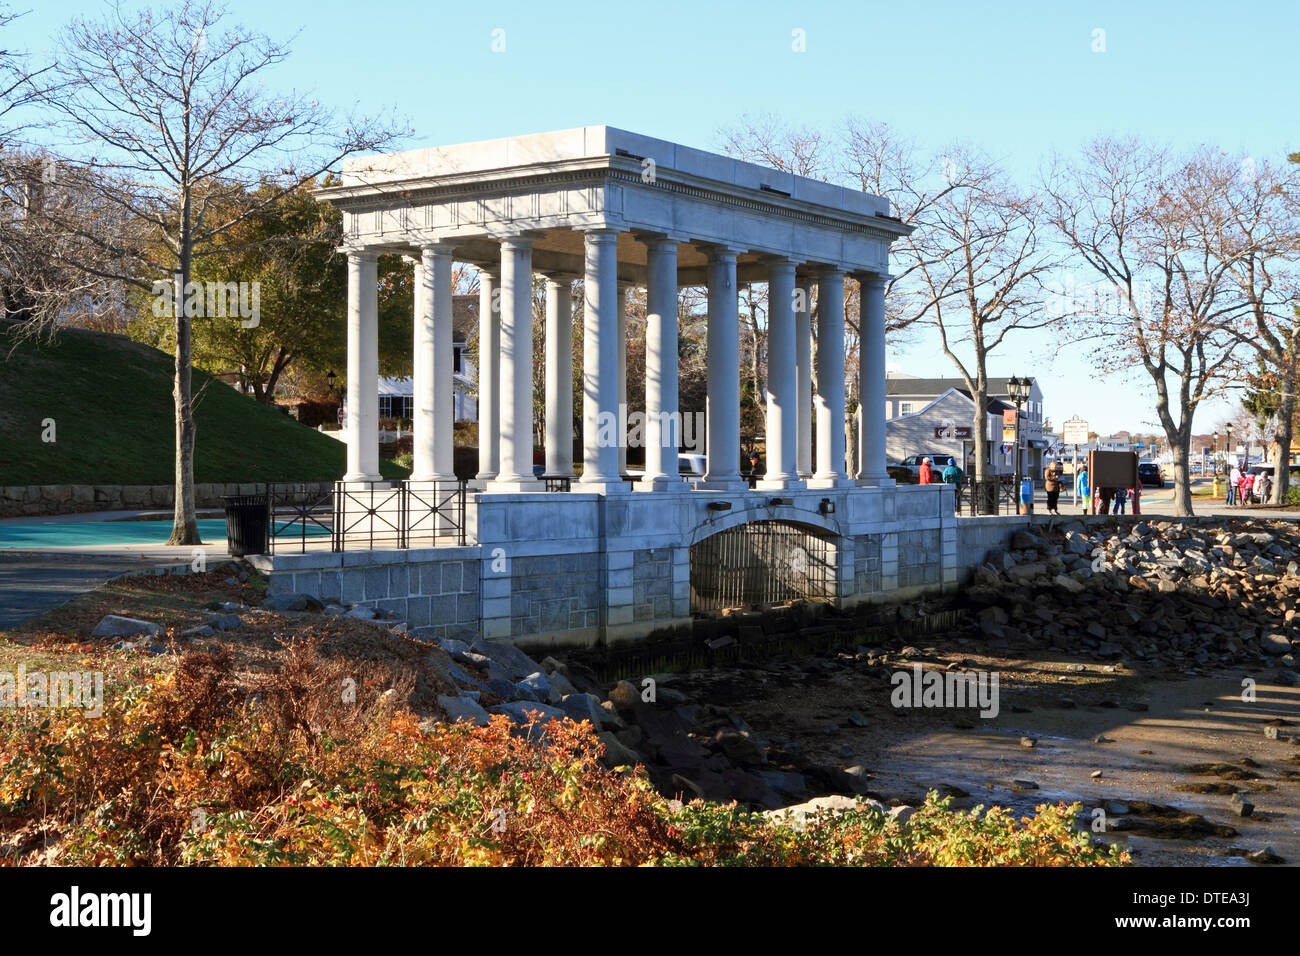 The monument enclosing Plymouth Rock in Plymouth Harbor. The site of the Pilgrims landing in America. Plymouth Massachusetts Stock Photo